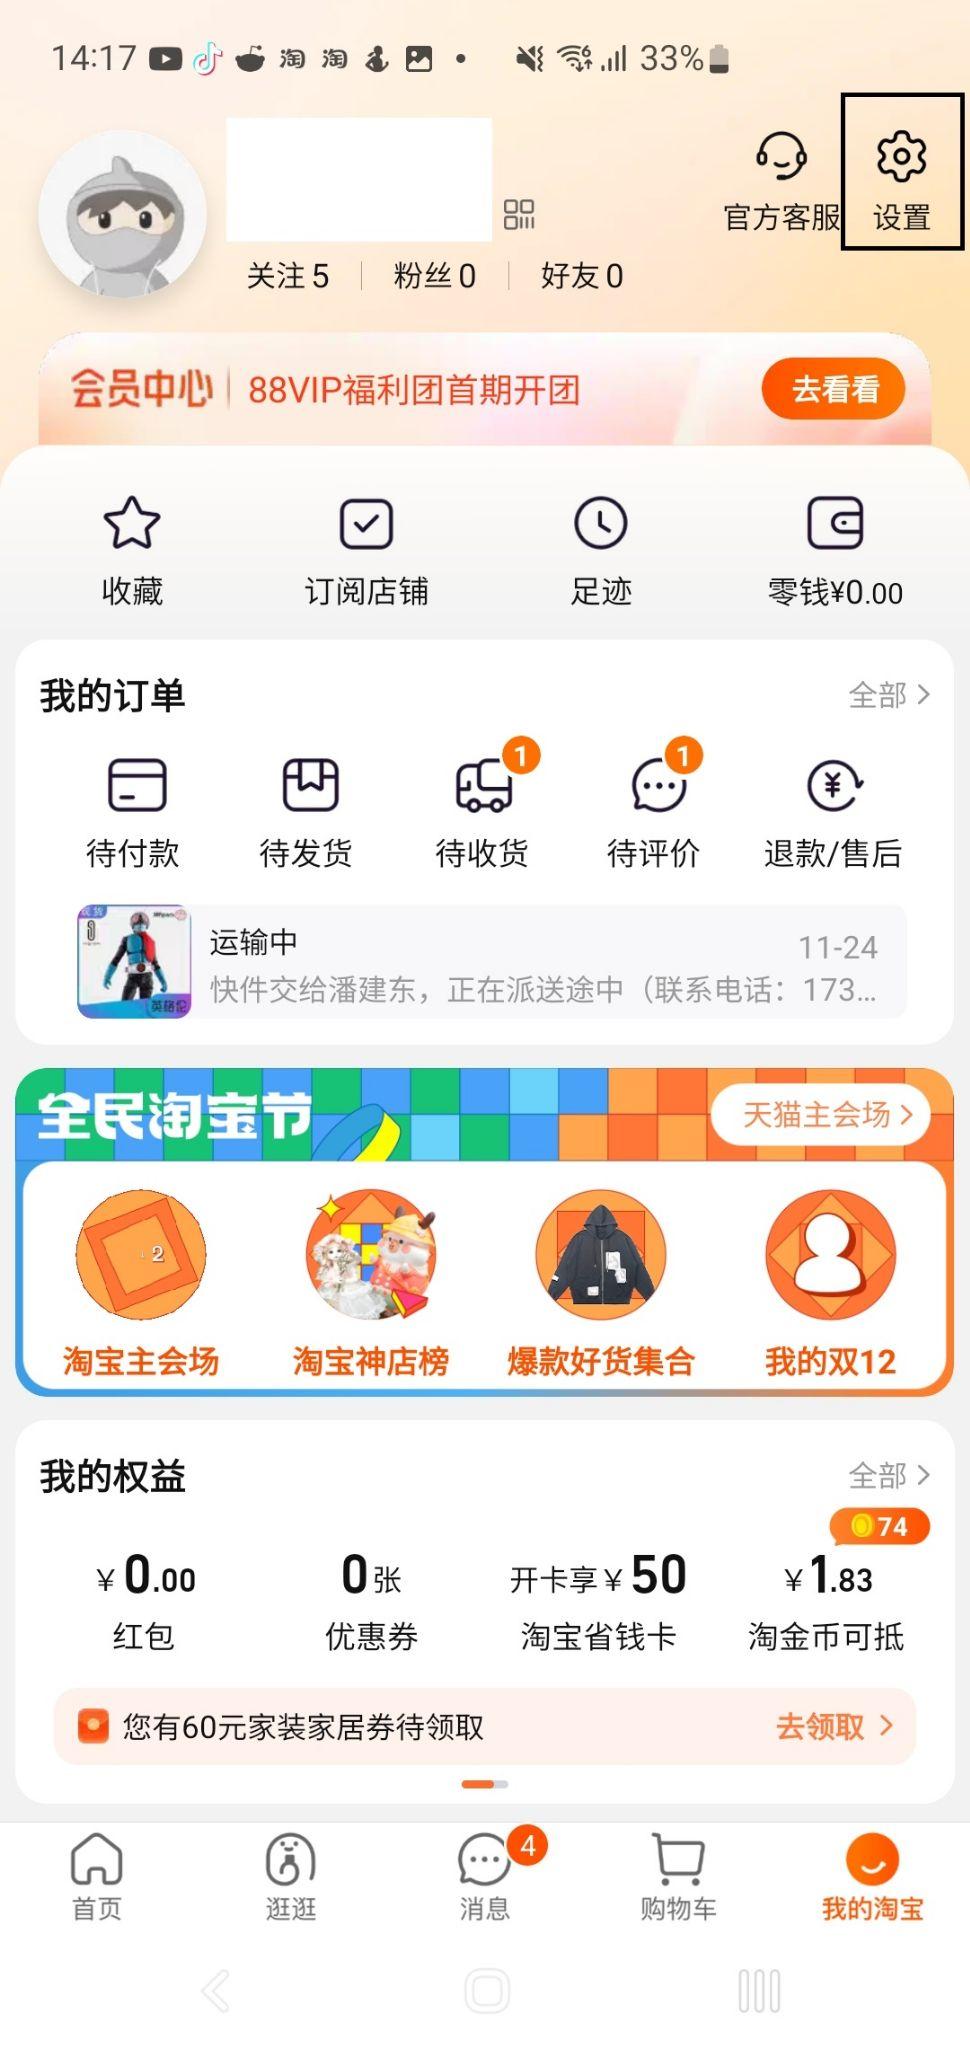 Change account username to manage your Taobao account